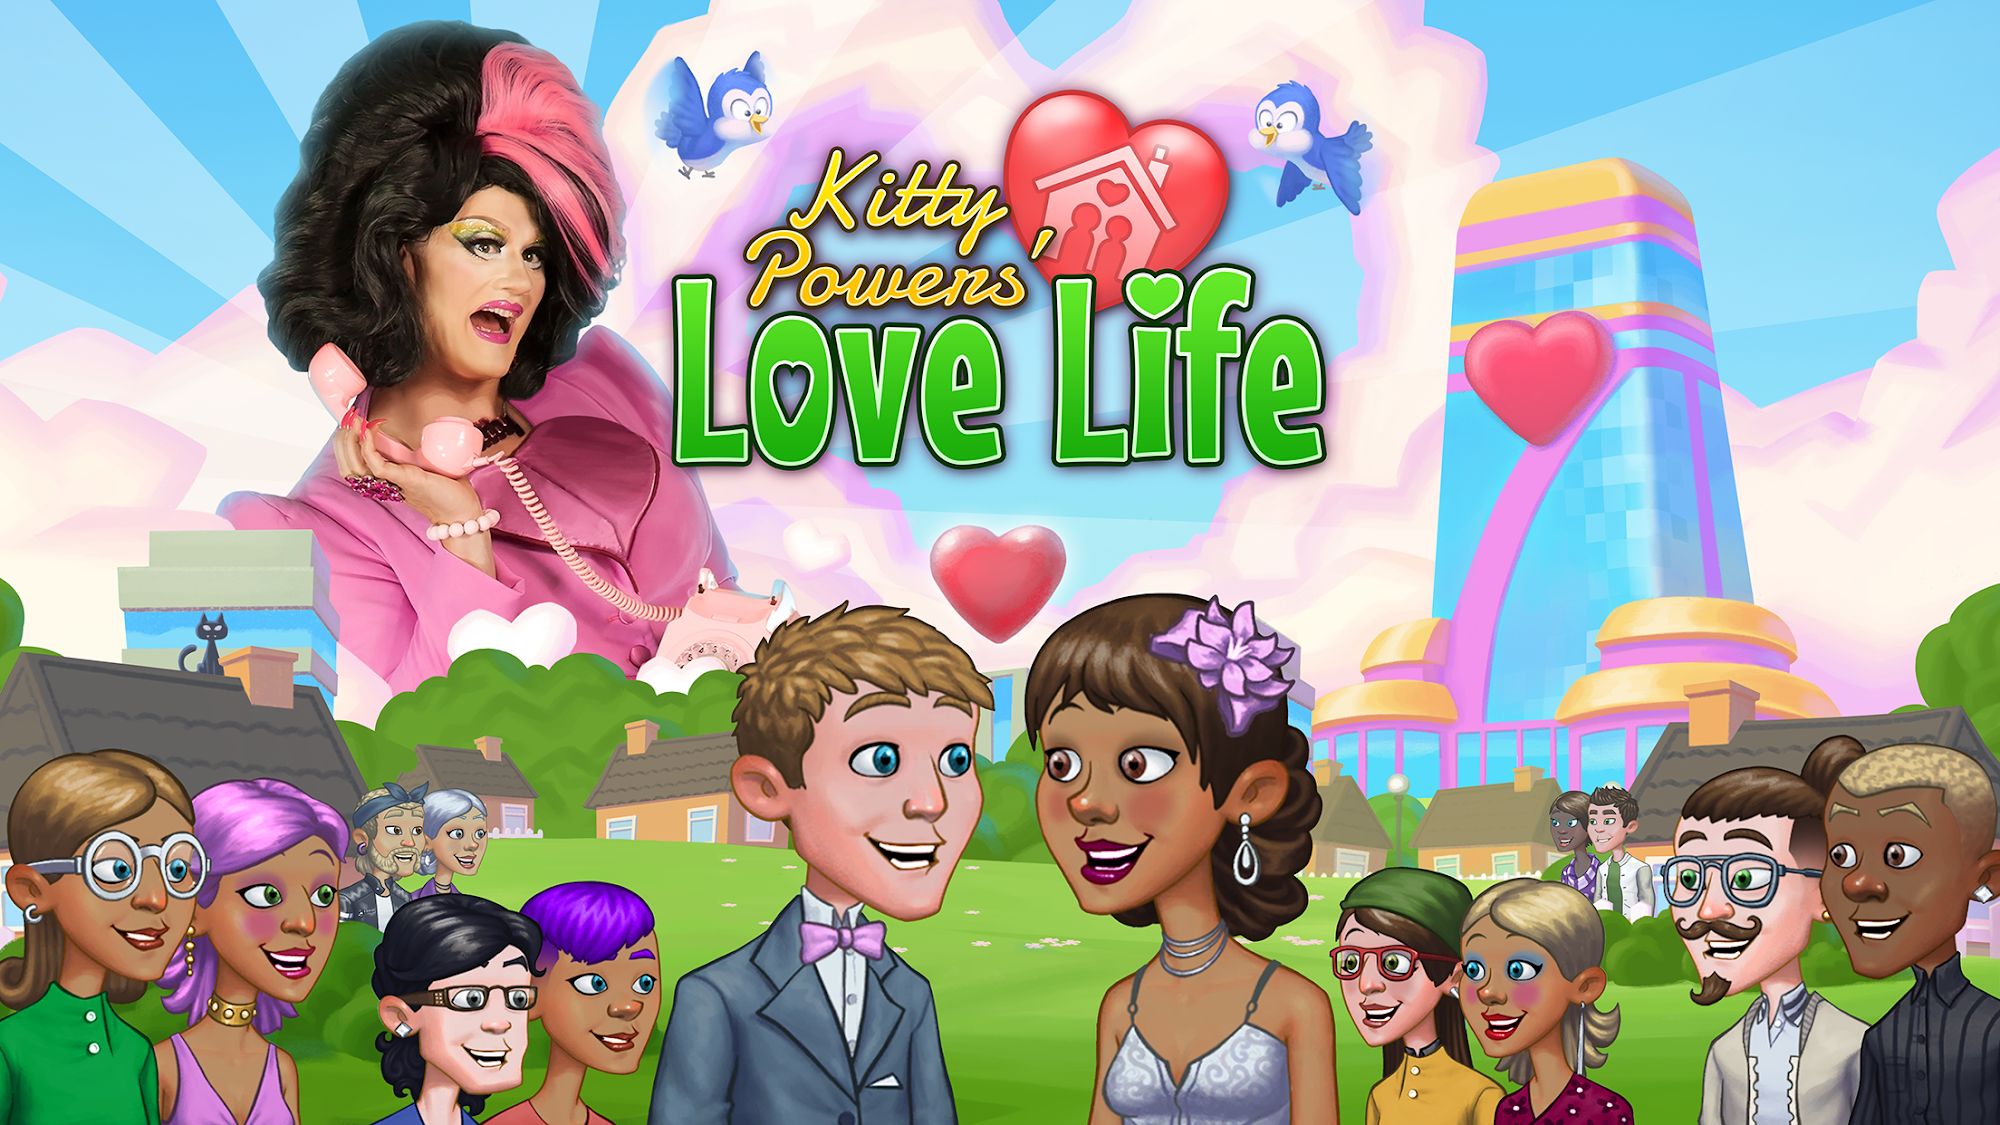 Download Kitty Powers' Love Life für Android kostenlos.